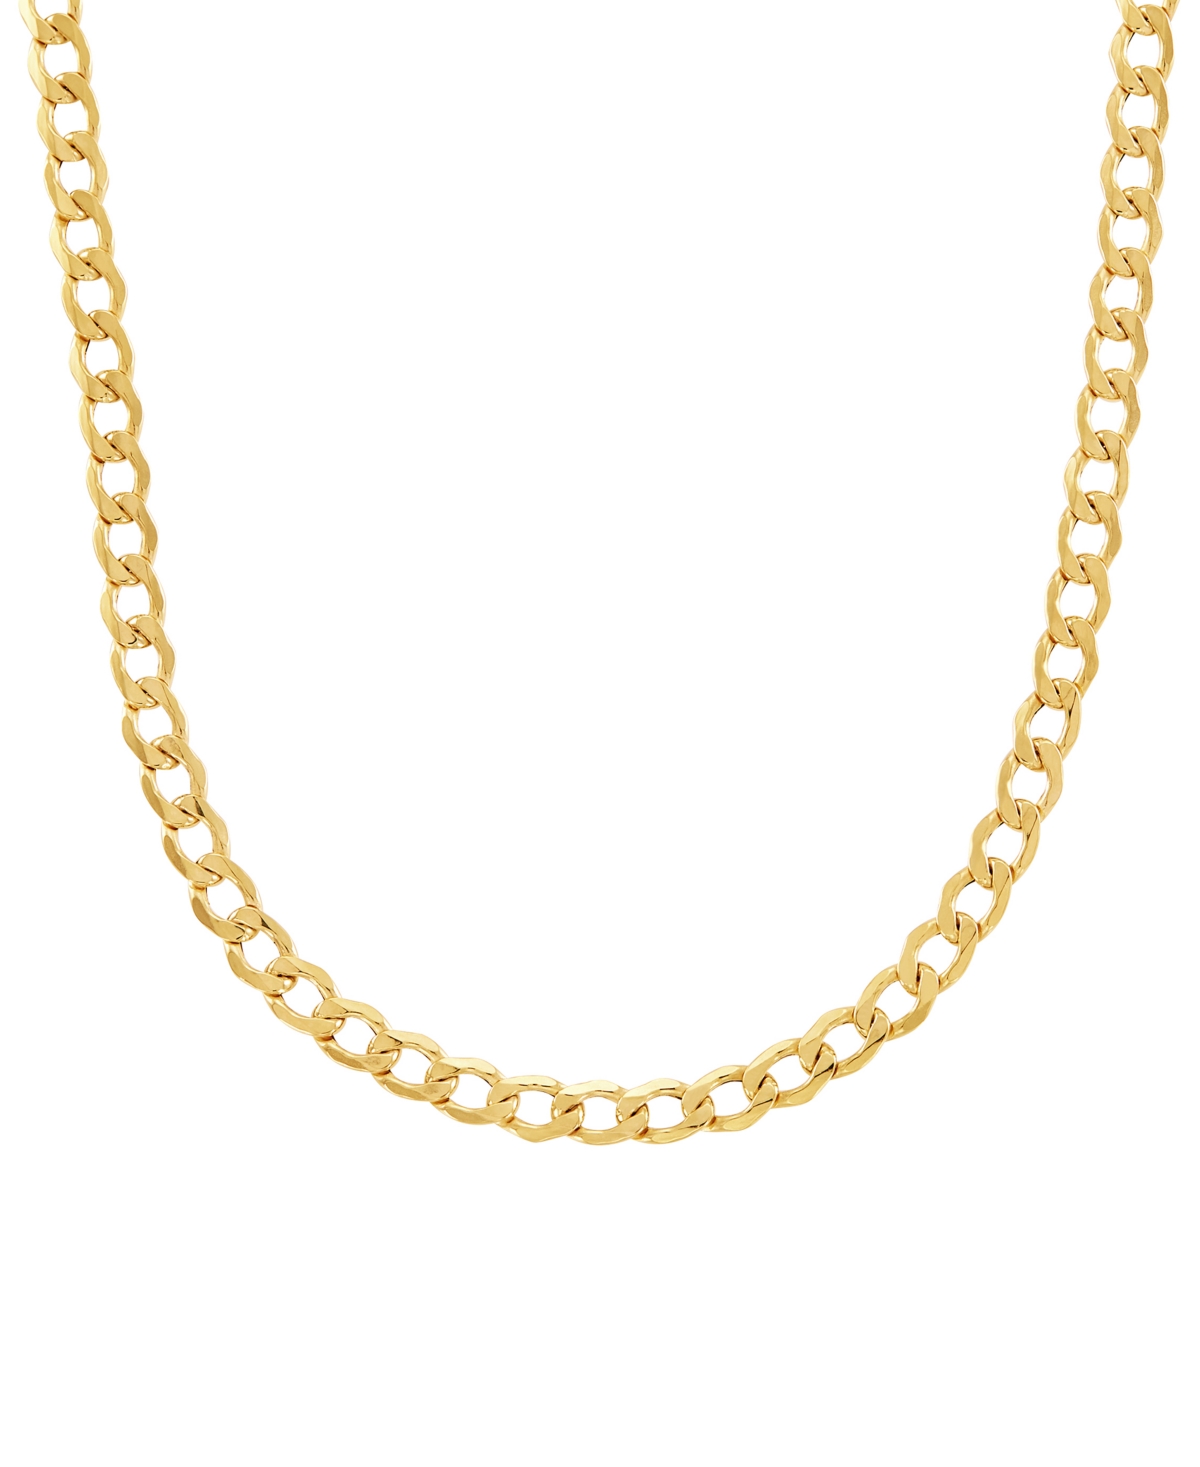 Curb Link 18" Chain Necklace (5mm) in 14k Gold - Yellow Gold